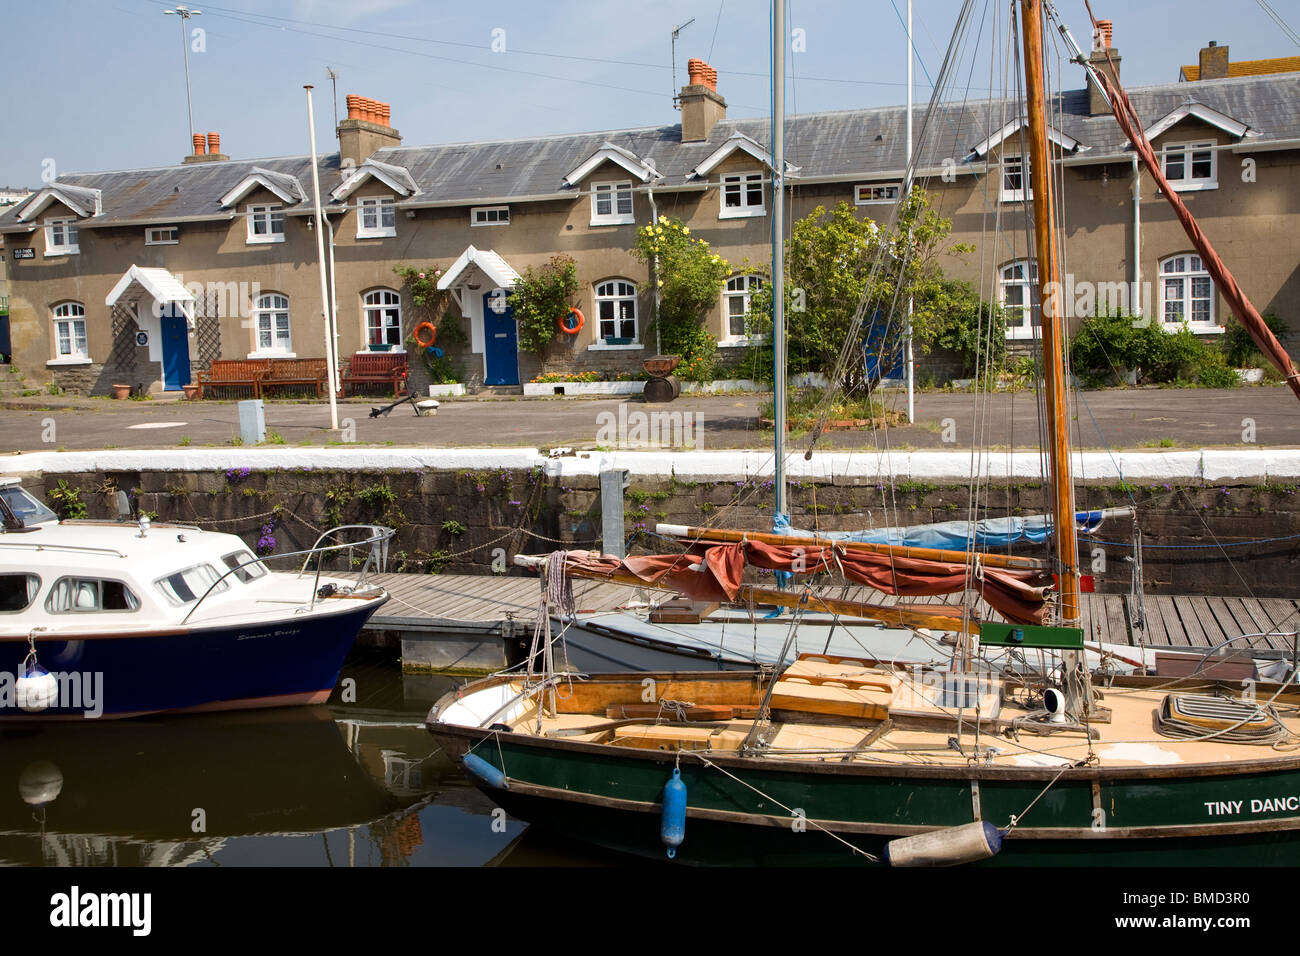 Old Dock cottages and boats, Hotwells, Bristol Stock Photo